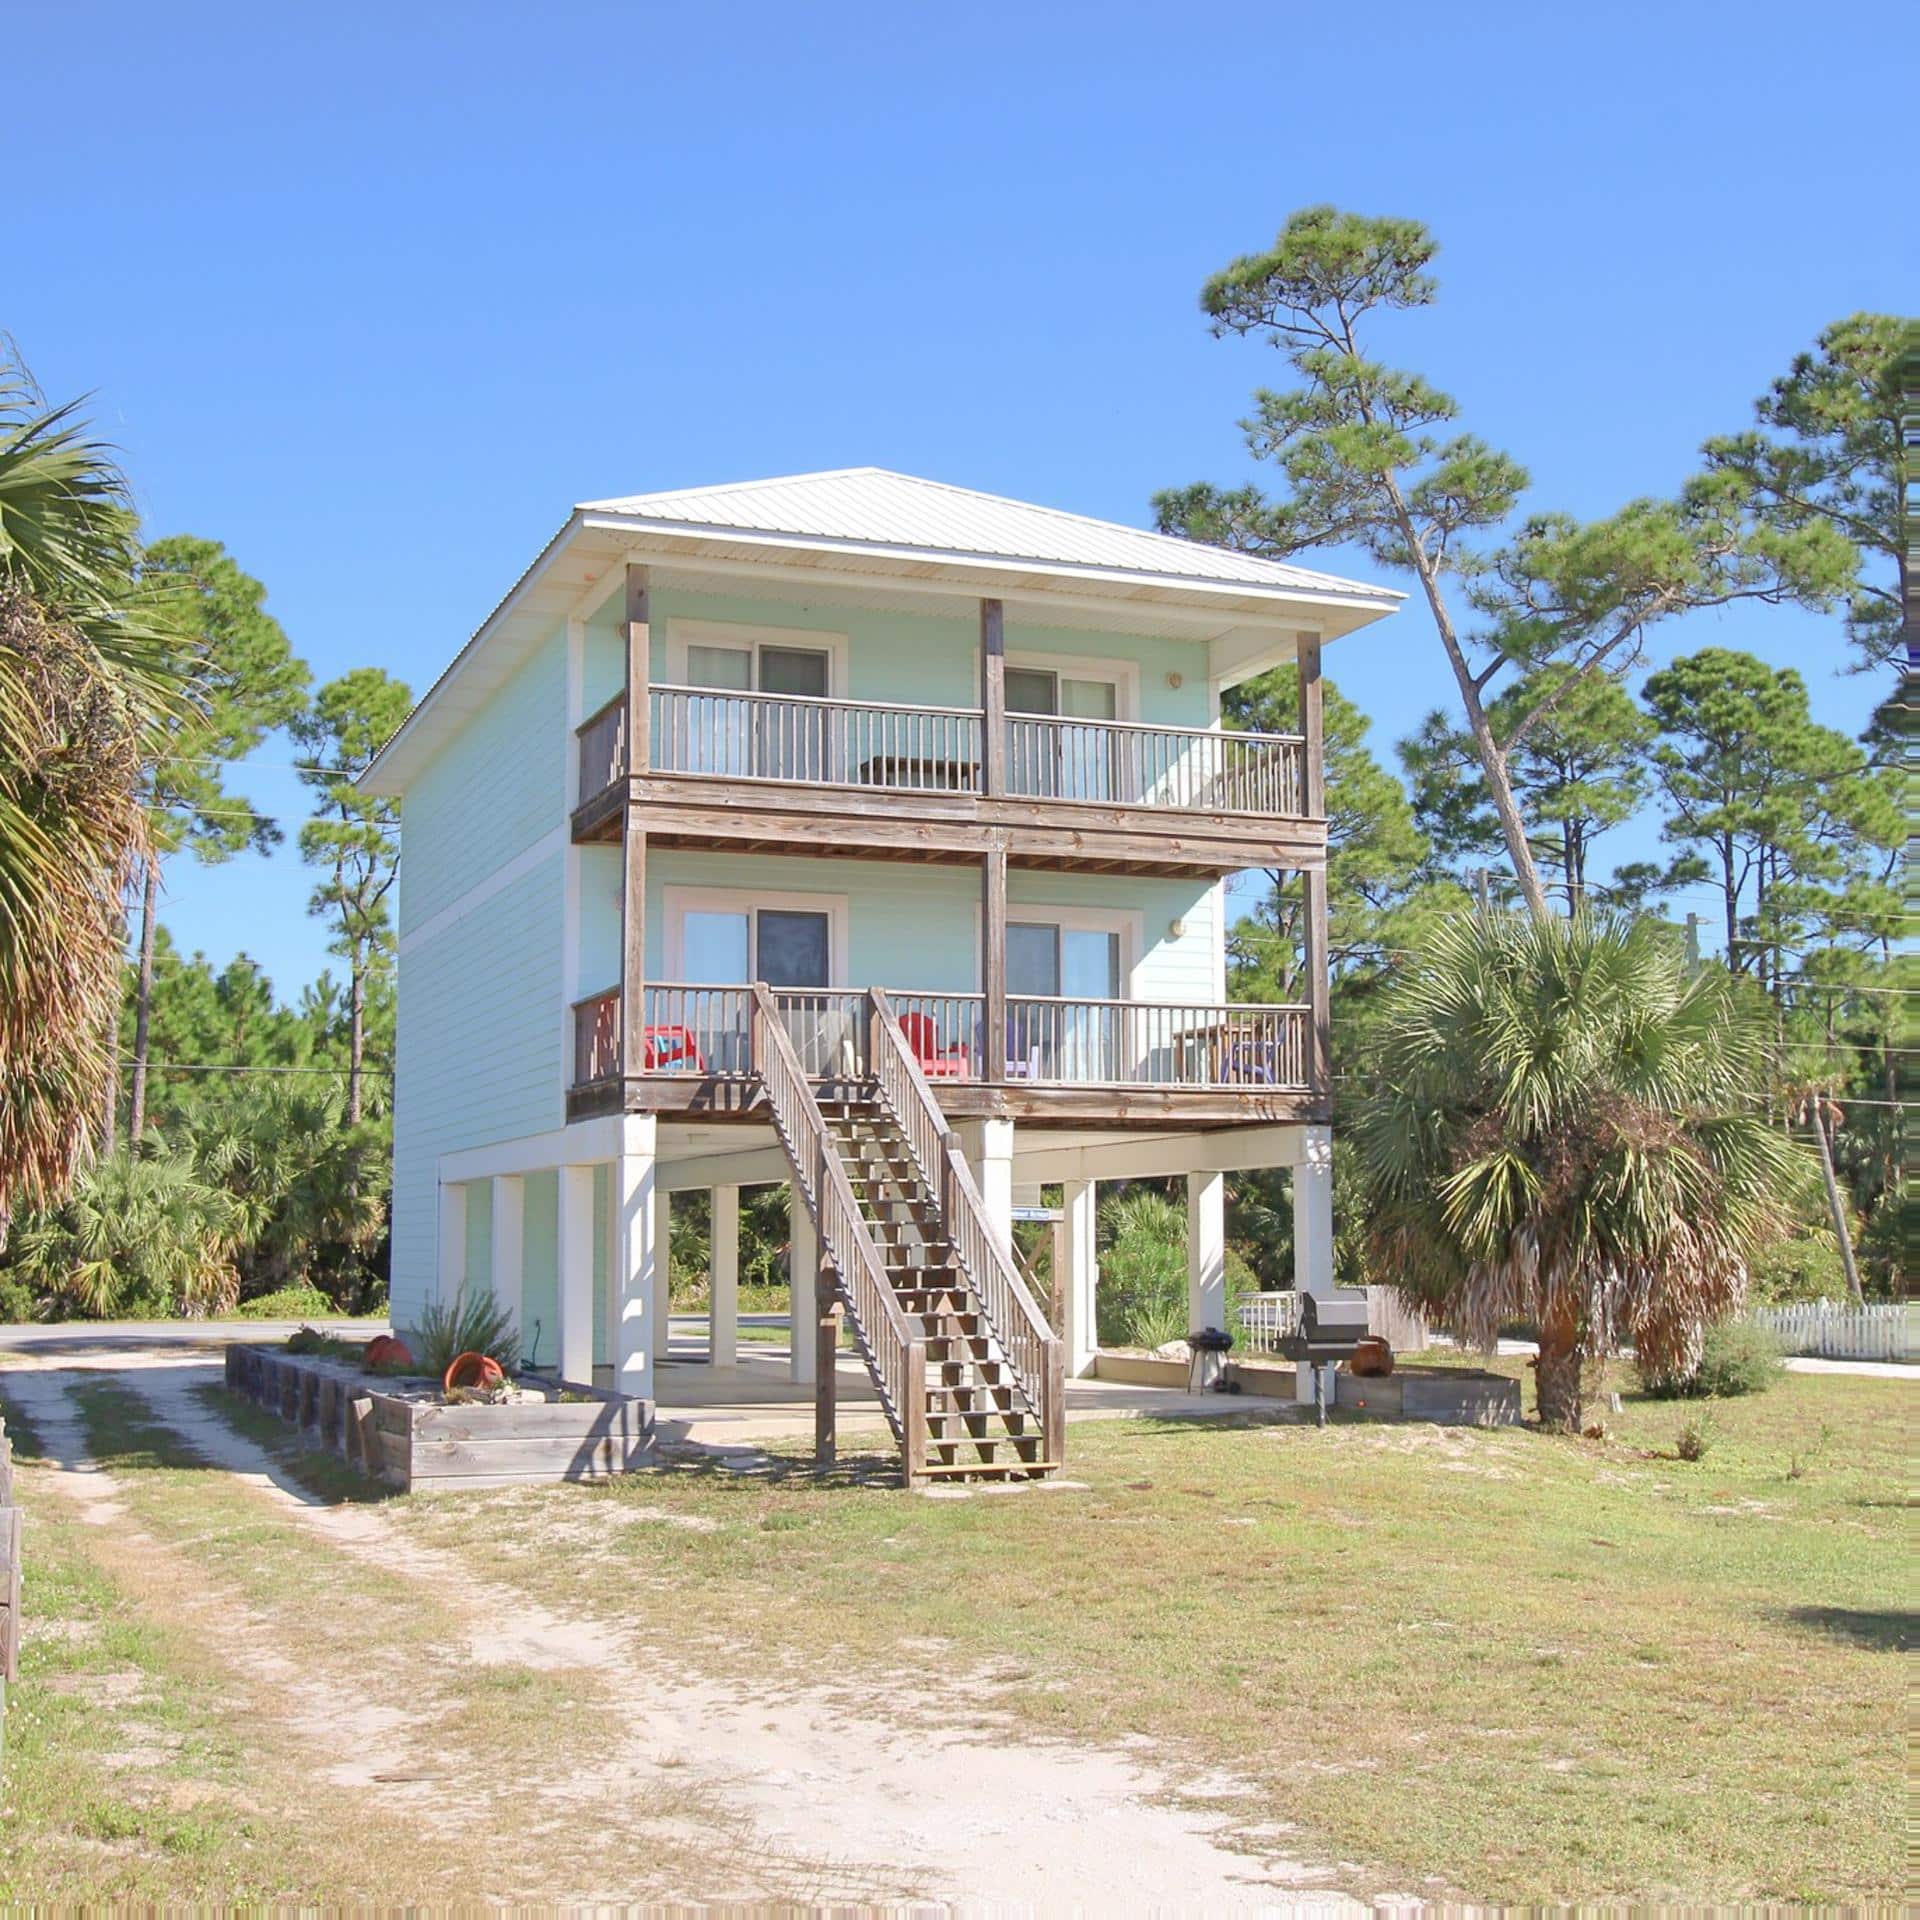 Starbright Retreat: 4 Bedroom Vacation Place for Rent in Cape San Blas ...